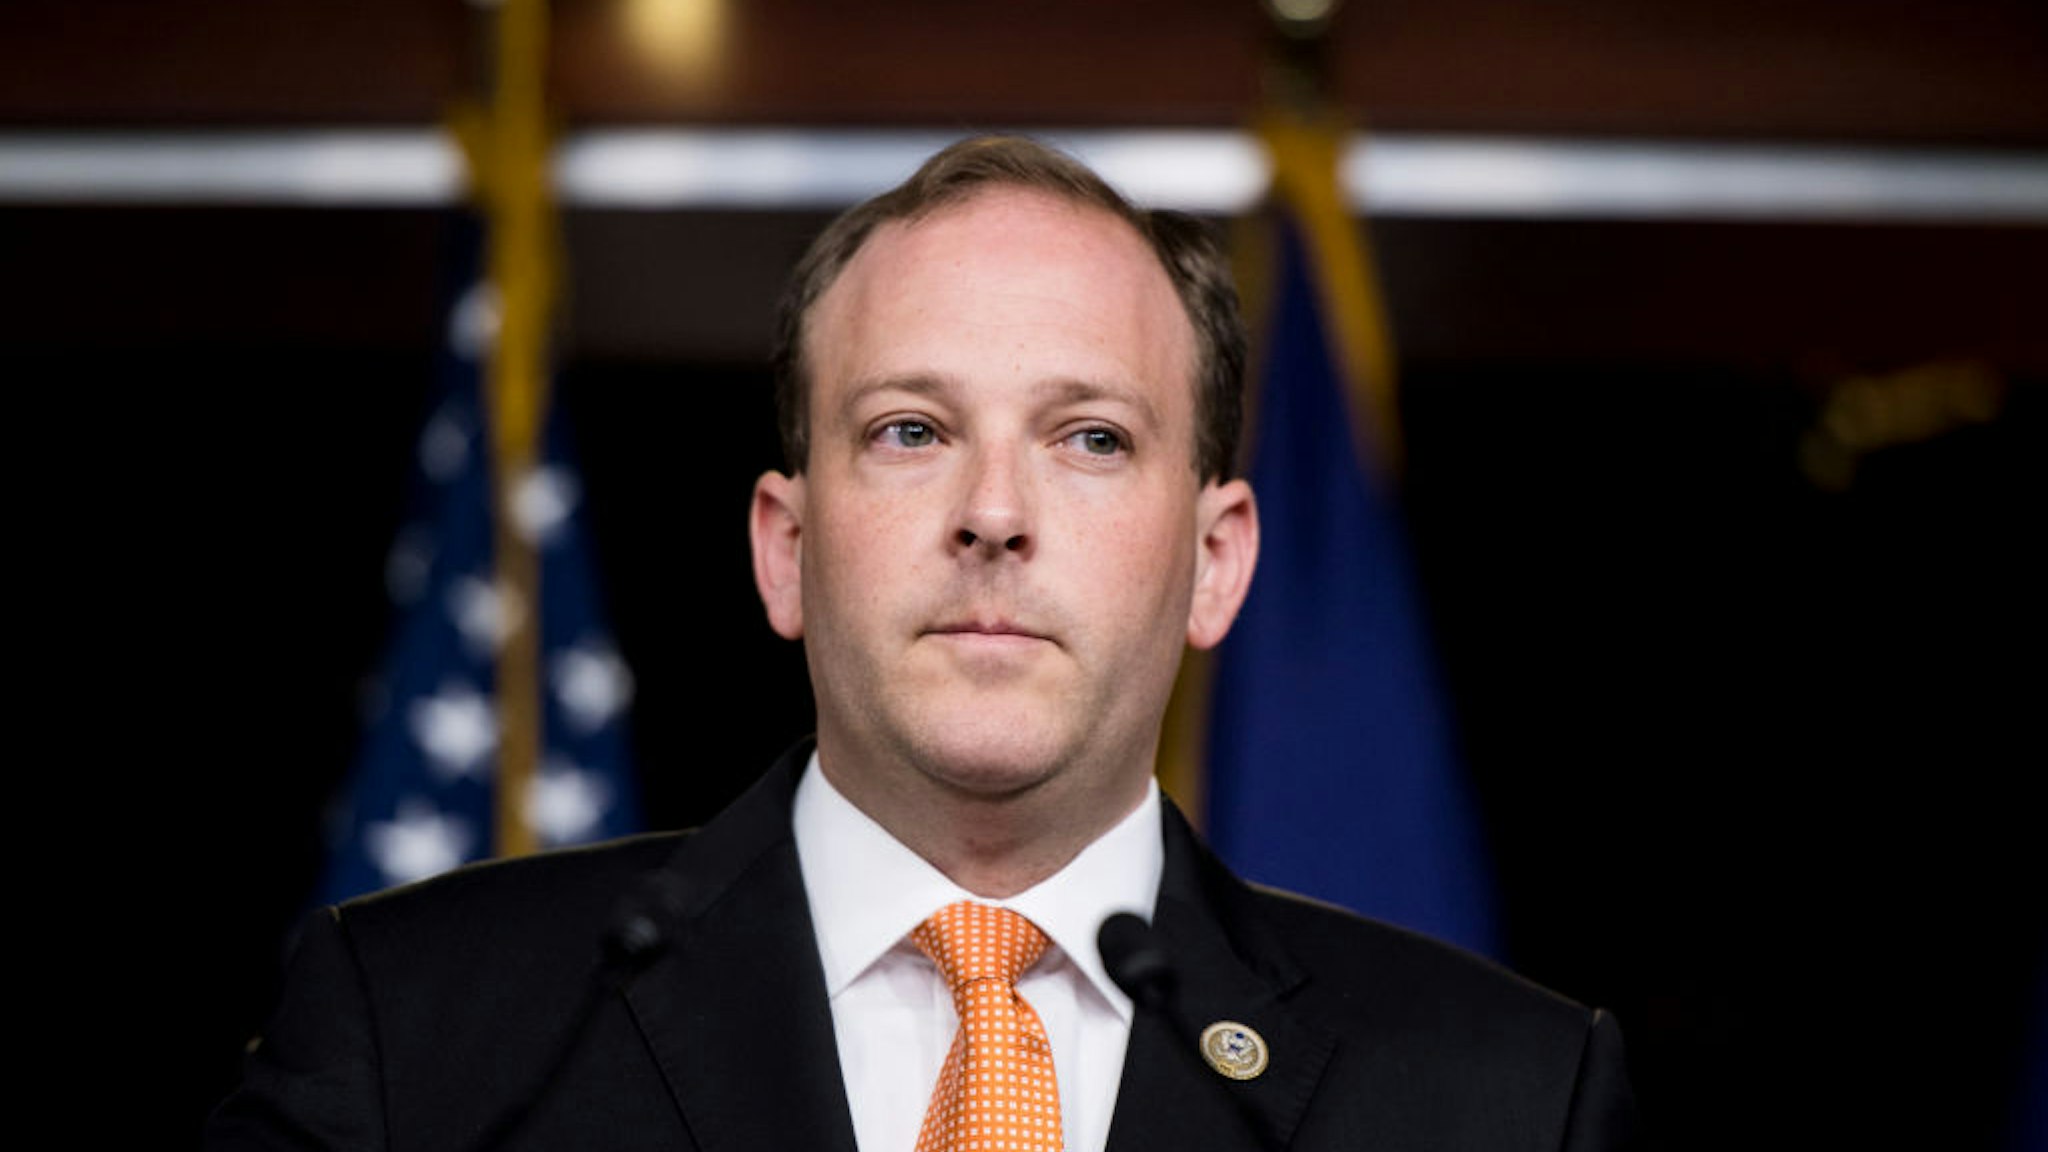 Lee Zeldin speaks during the press conference calling on President Trump to declassify the Carter Page FISA applications